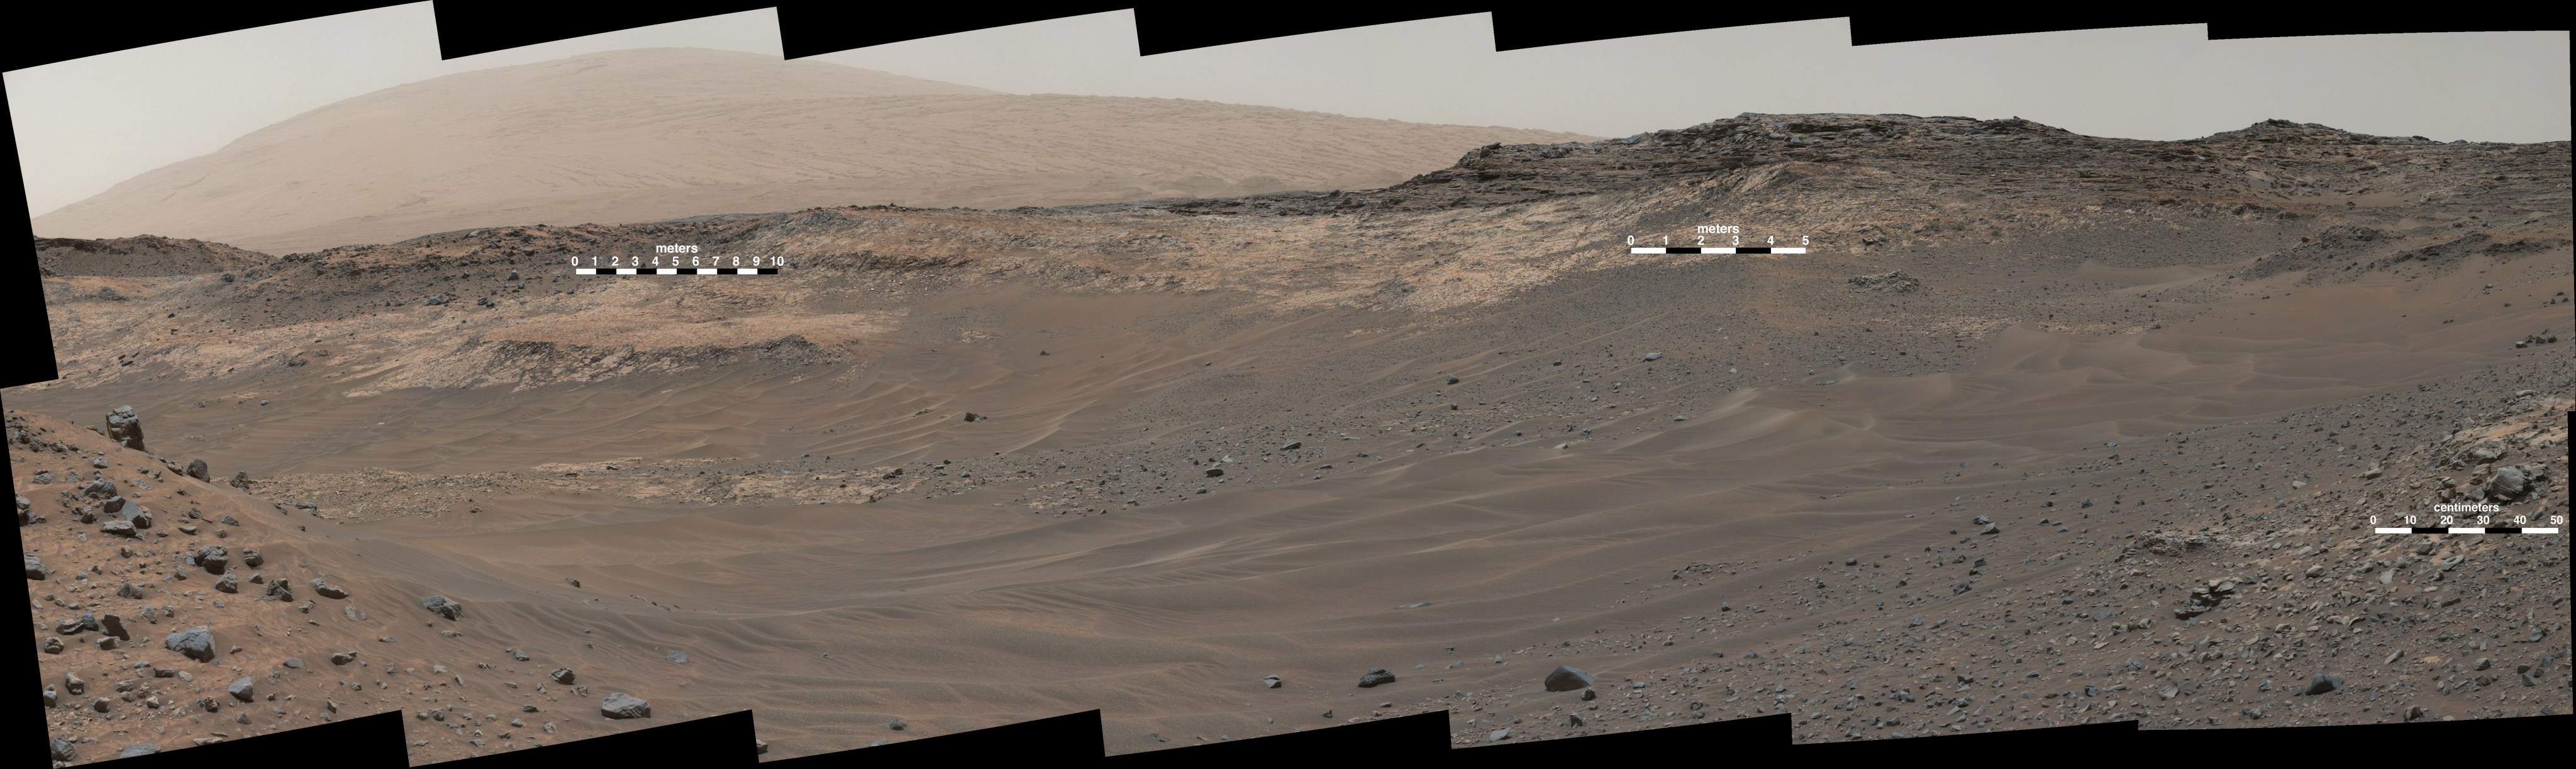 This May 10, 2015, view from Curiosity's Mastcam shows terrain judged difficult for traversing between the rover and an outcrop in the middle distance where a pale rock unit meets a darker rock unit above it. The rover team decided not to approach this outcrop and identified an alternative.